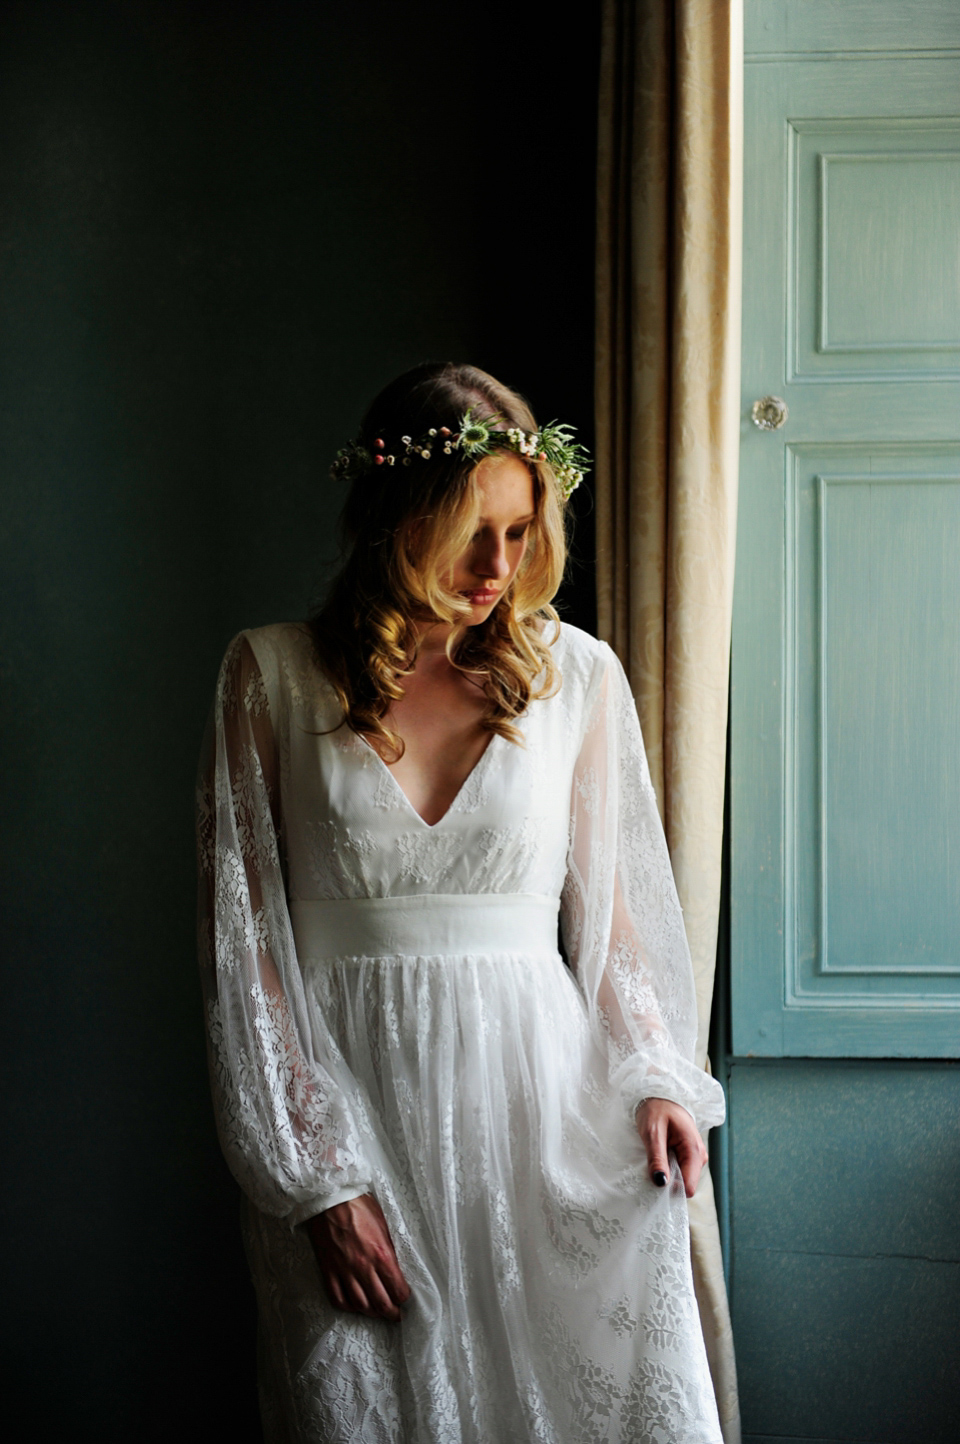 Indiebride – Boho and Alternative Wedding Dresses for the Cool, Free Spirited Bride